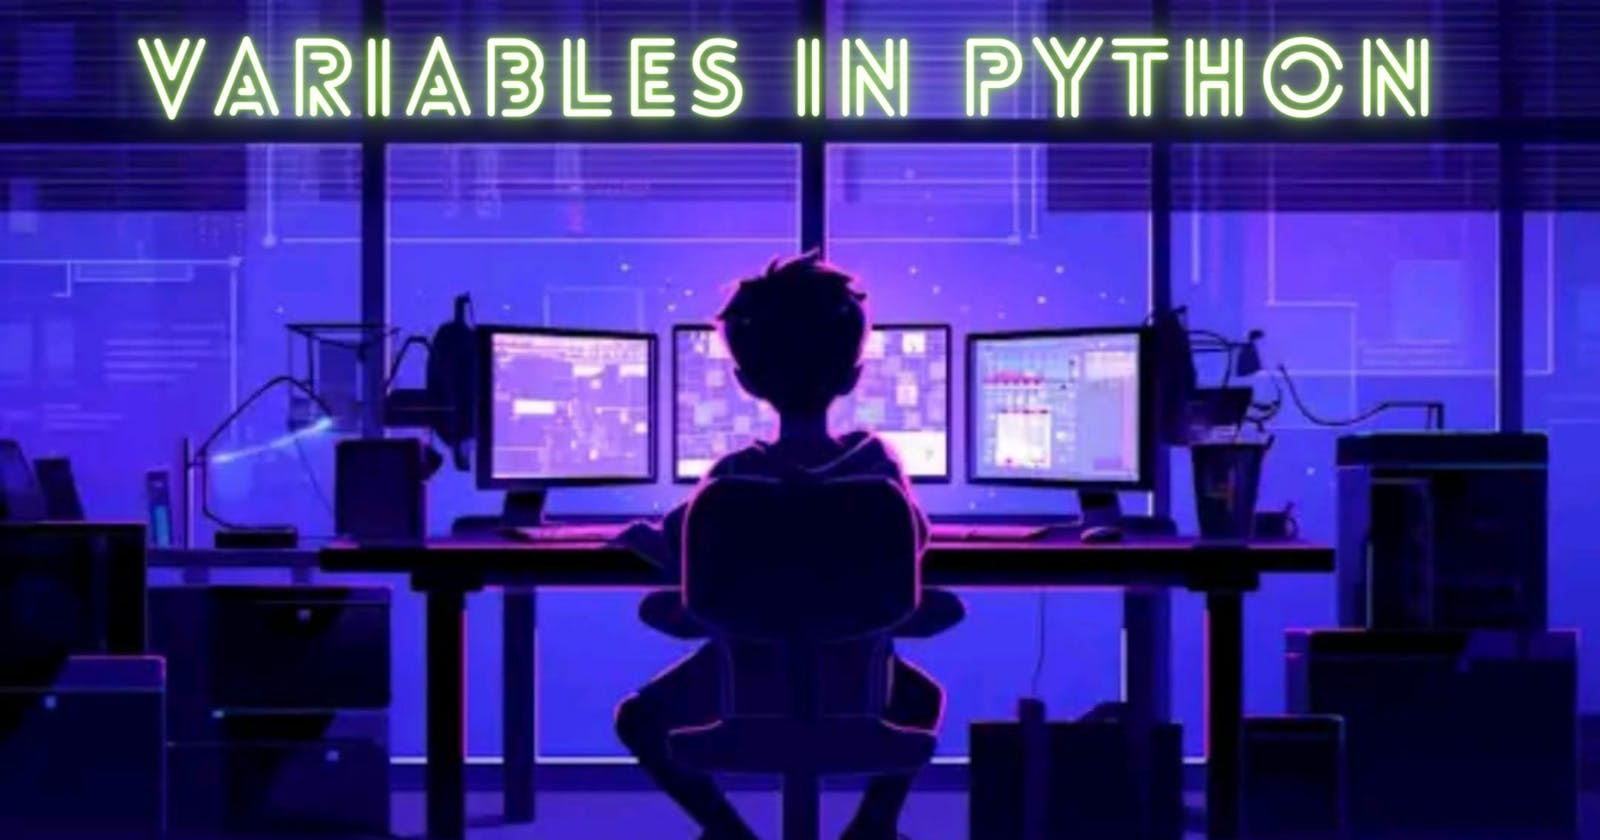 " Variables "  in Python.